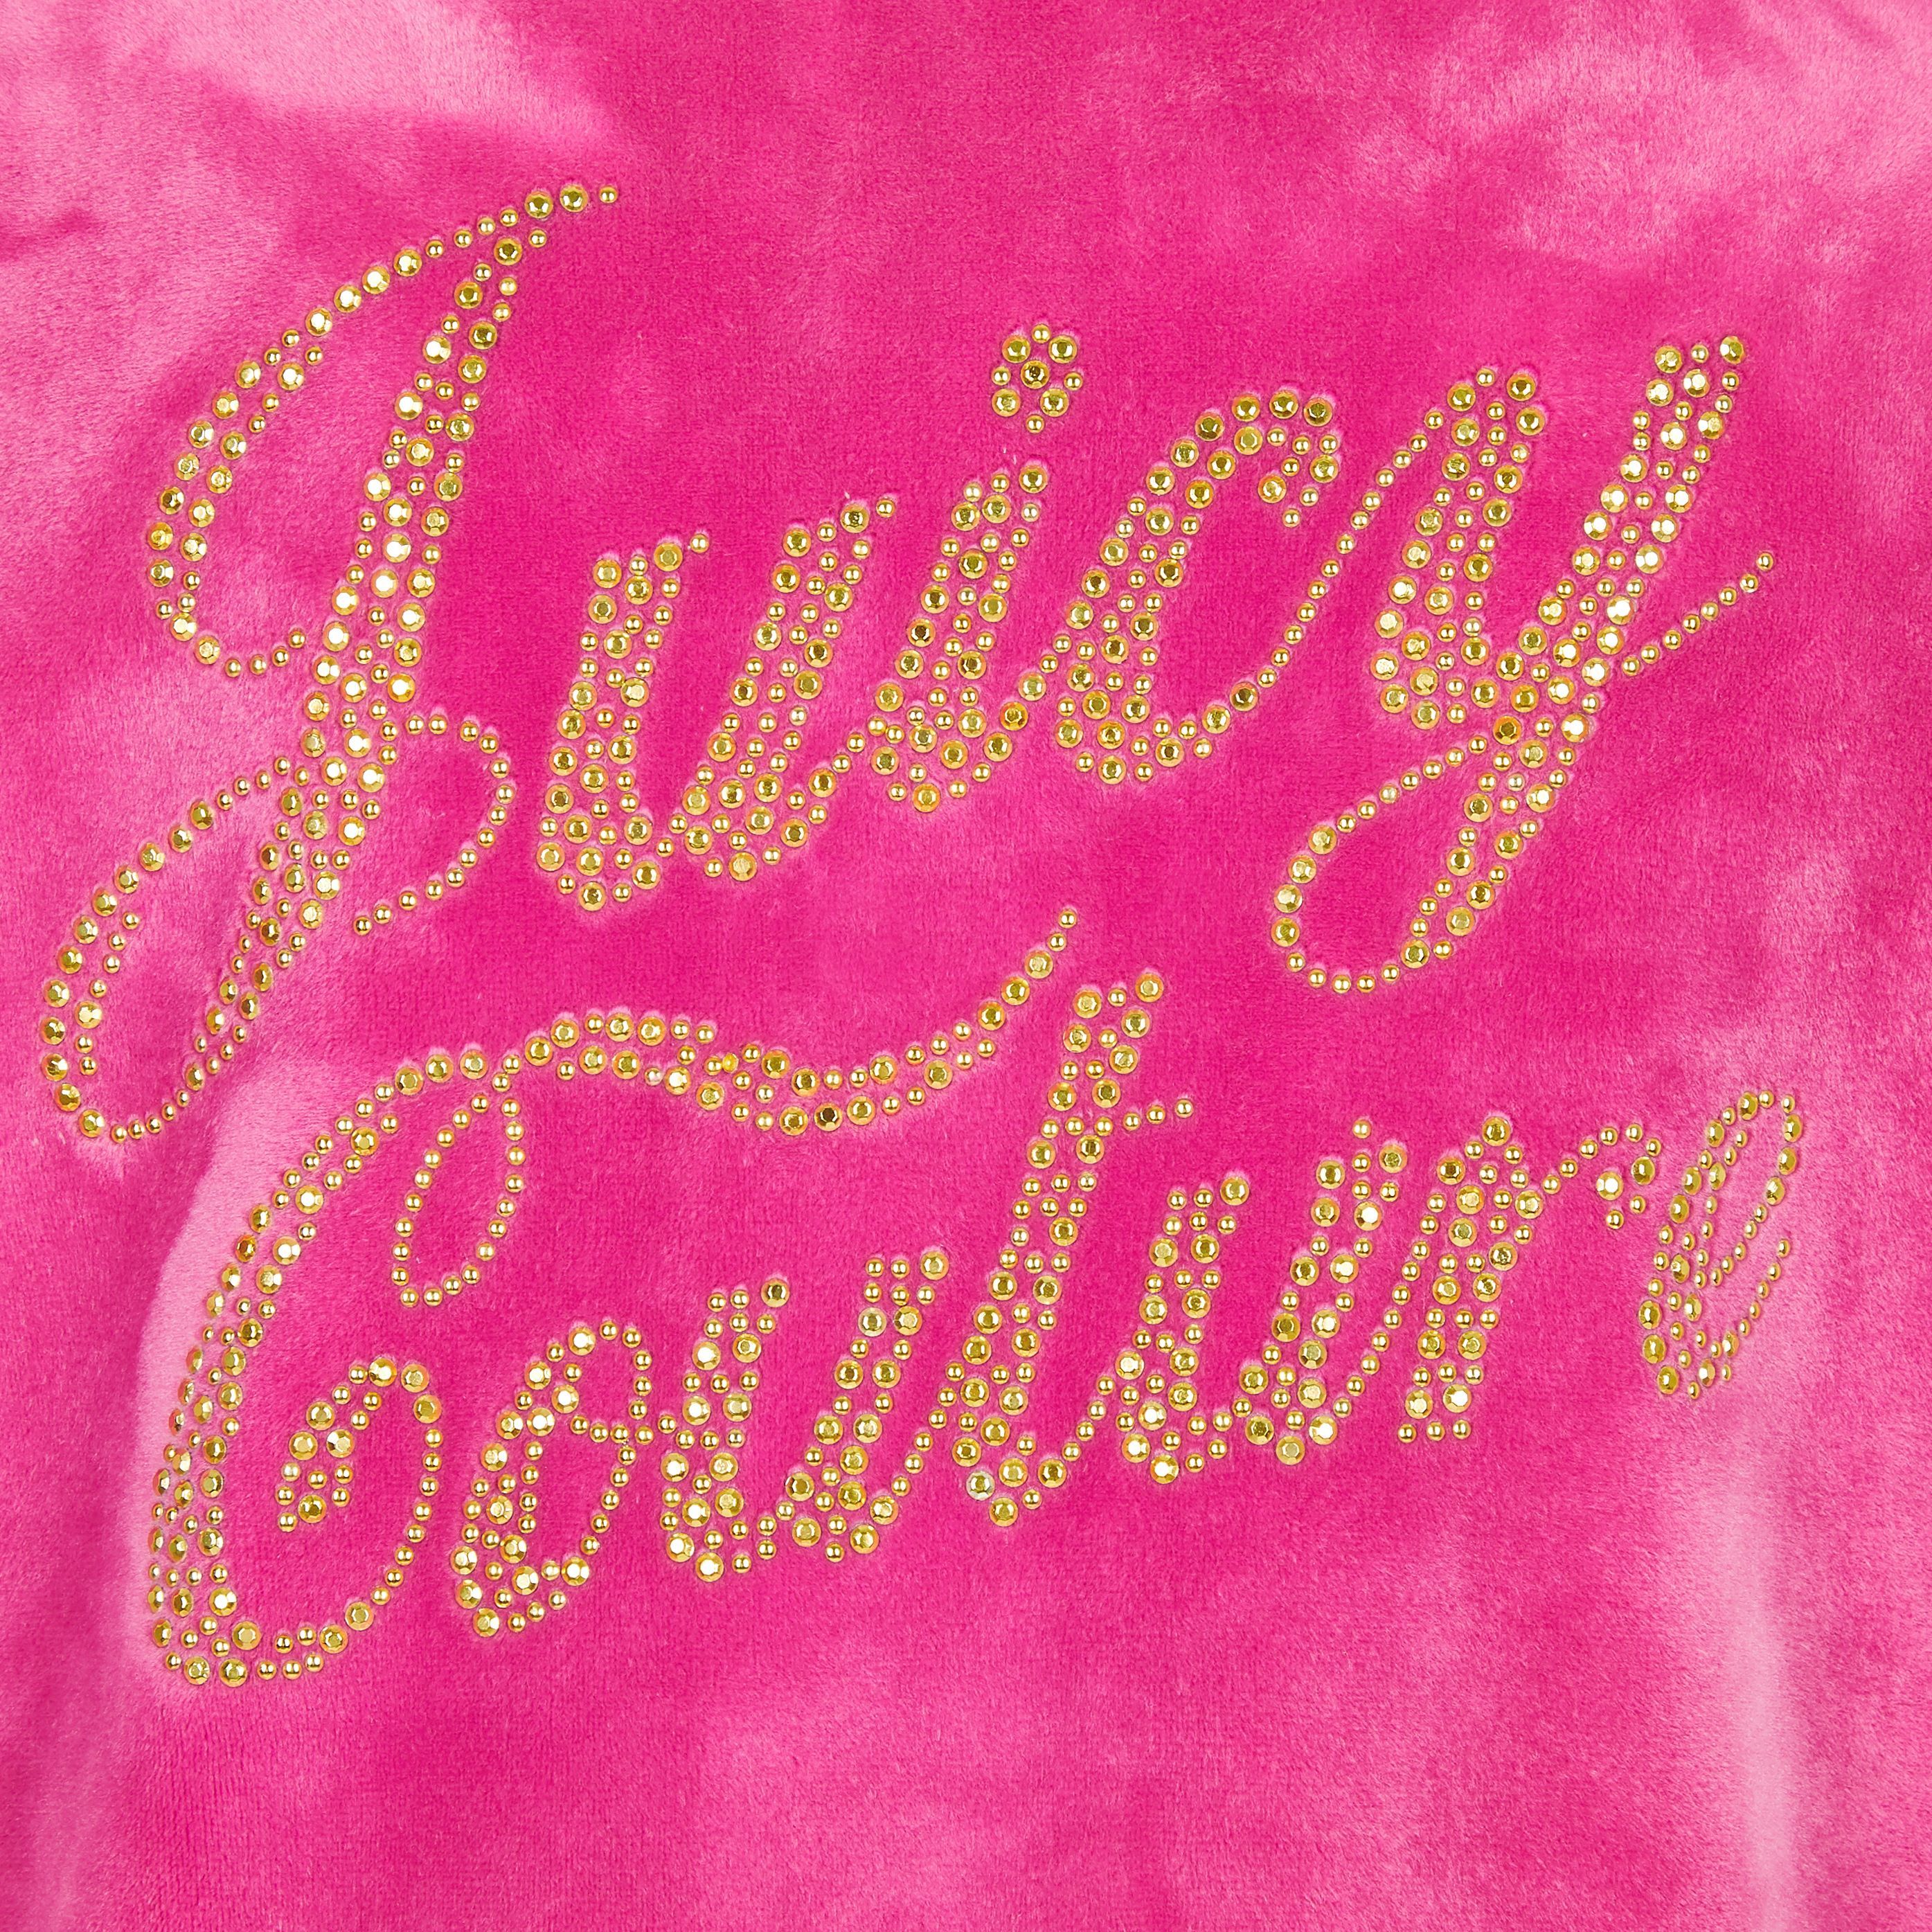 River Island Girls Juicy Couture Pink track top. Pink vibes, Pink tumblr aesthetic, Pink aesthetic